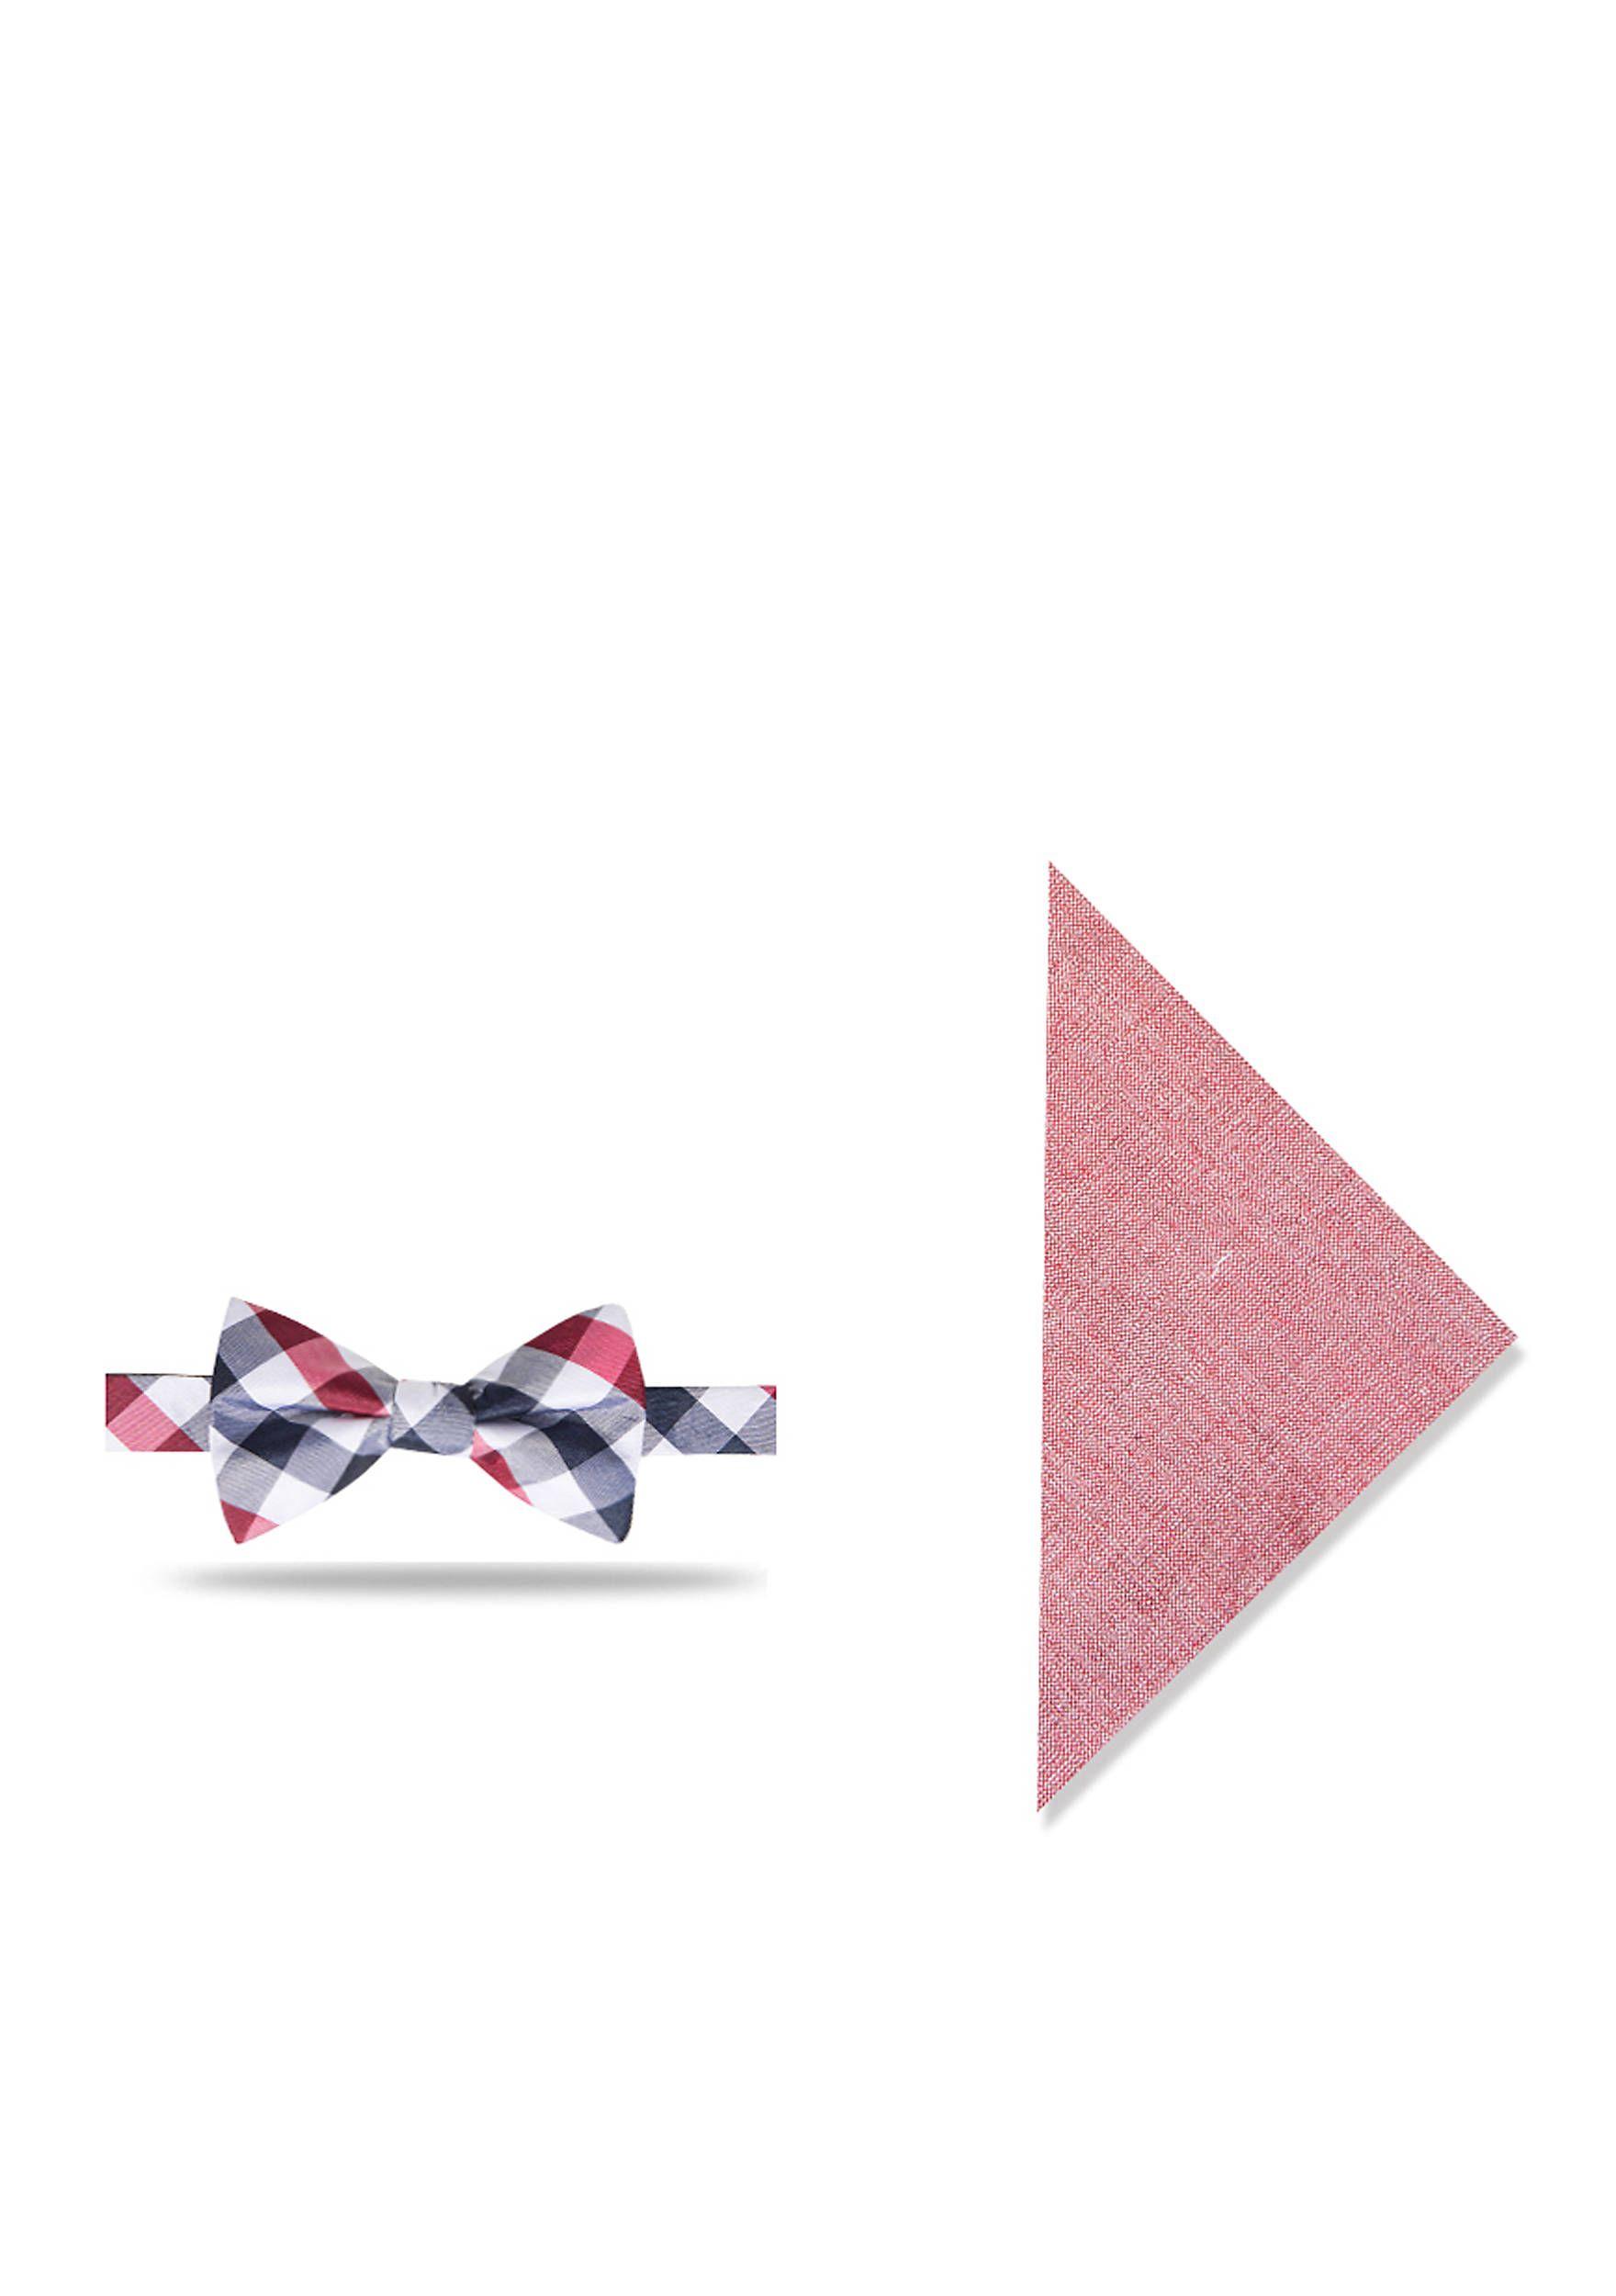 The Square Red Crown Logo - Crown & Ivy™ Catalina Gingham Set Bow Tie And Pocket Square Red